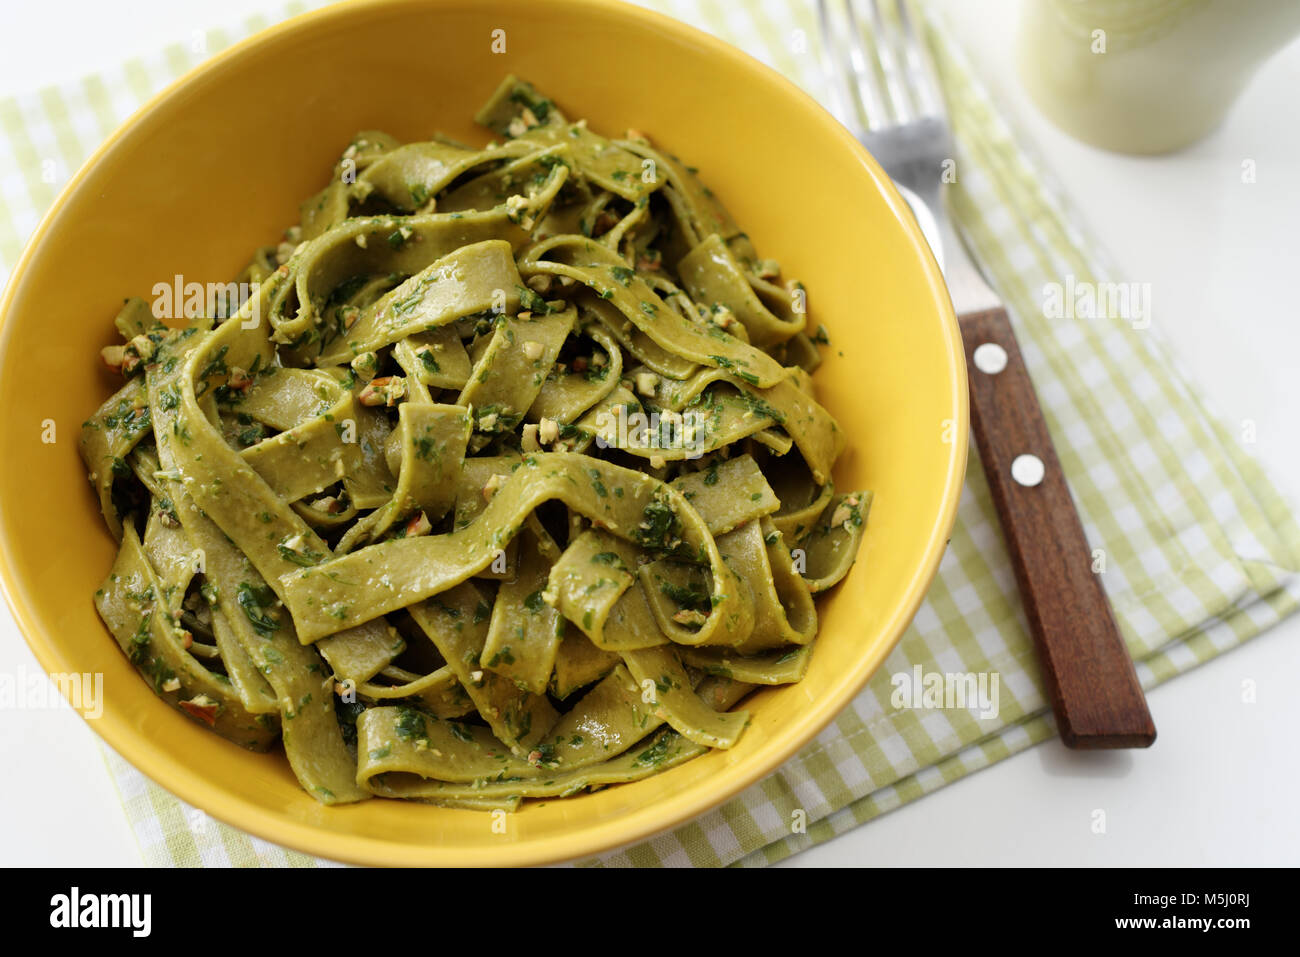 Spinach pasta with pesto sauce in a yellow bowl Stock Photo